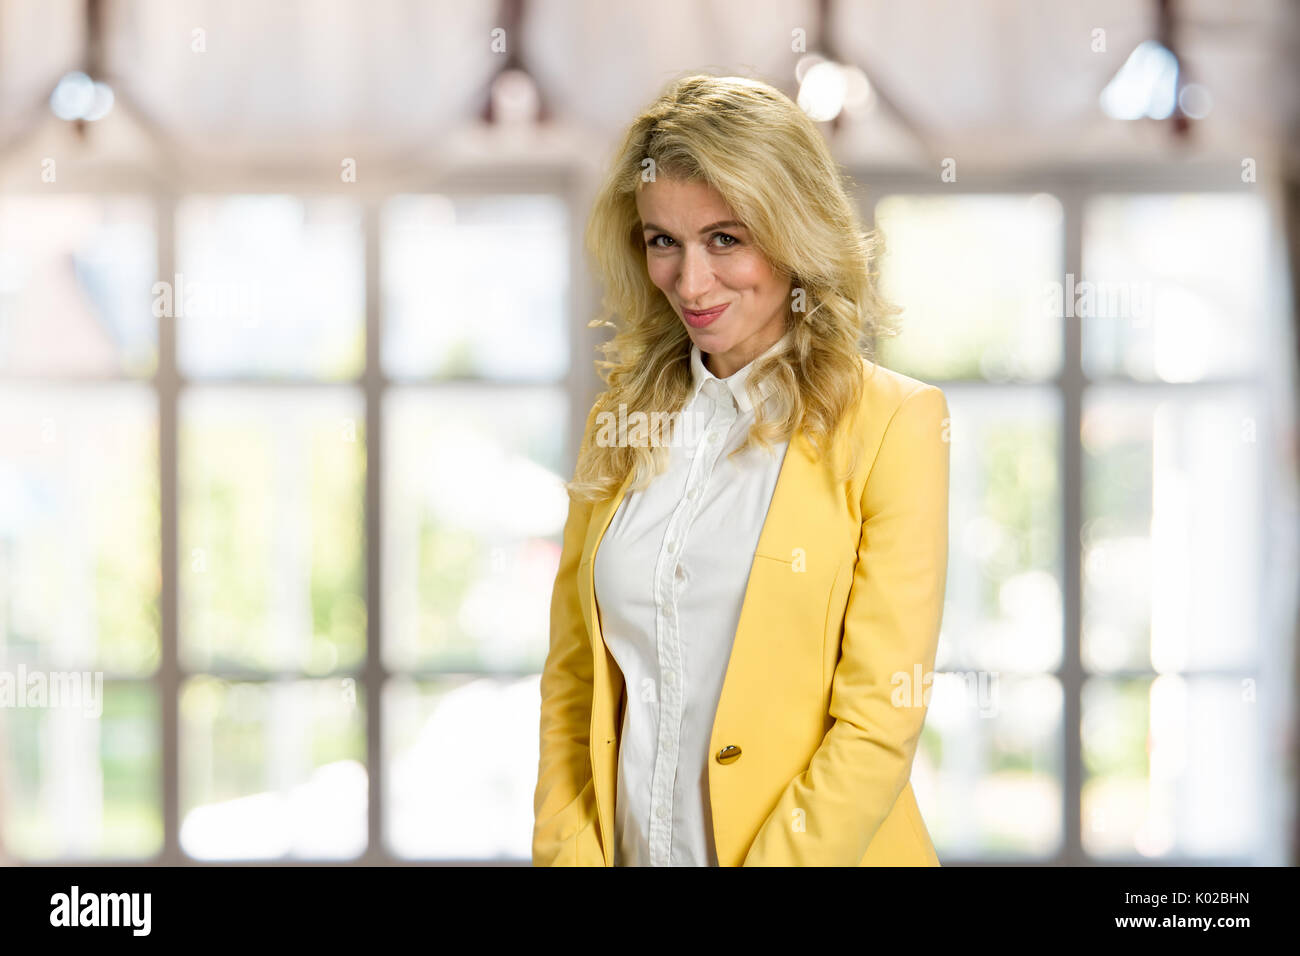 Beautiful shy girl looking at camera. Beautiful embarrassed blonde woman in formal wear posing on blurred background. Stock Photo